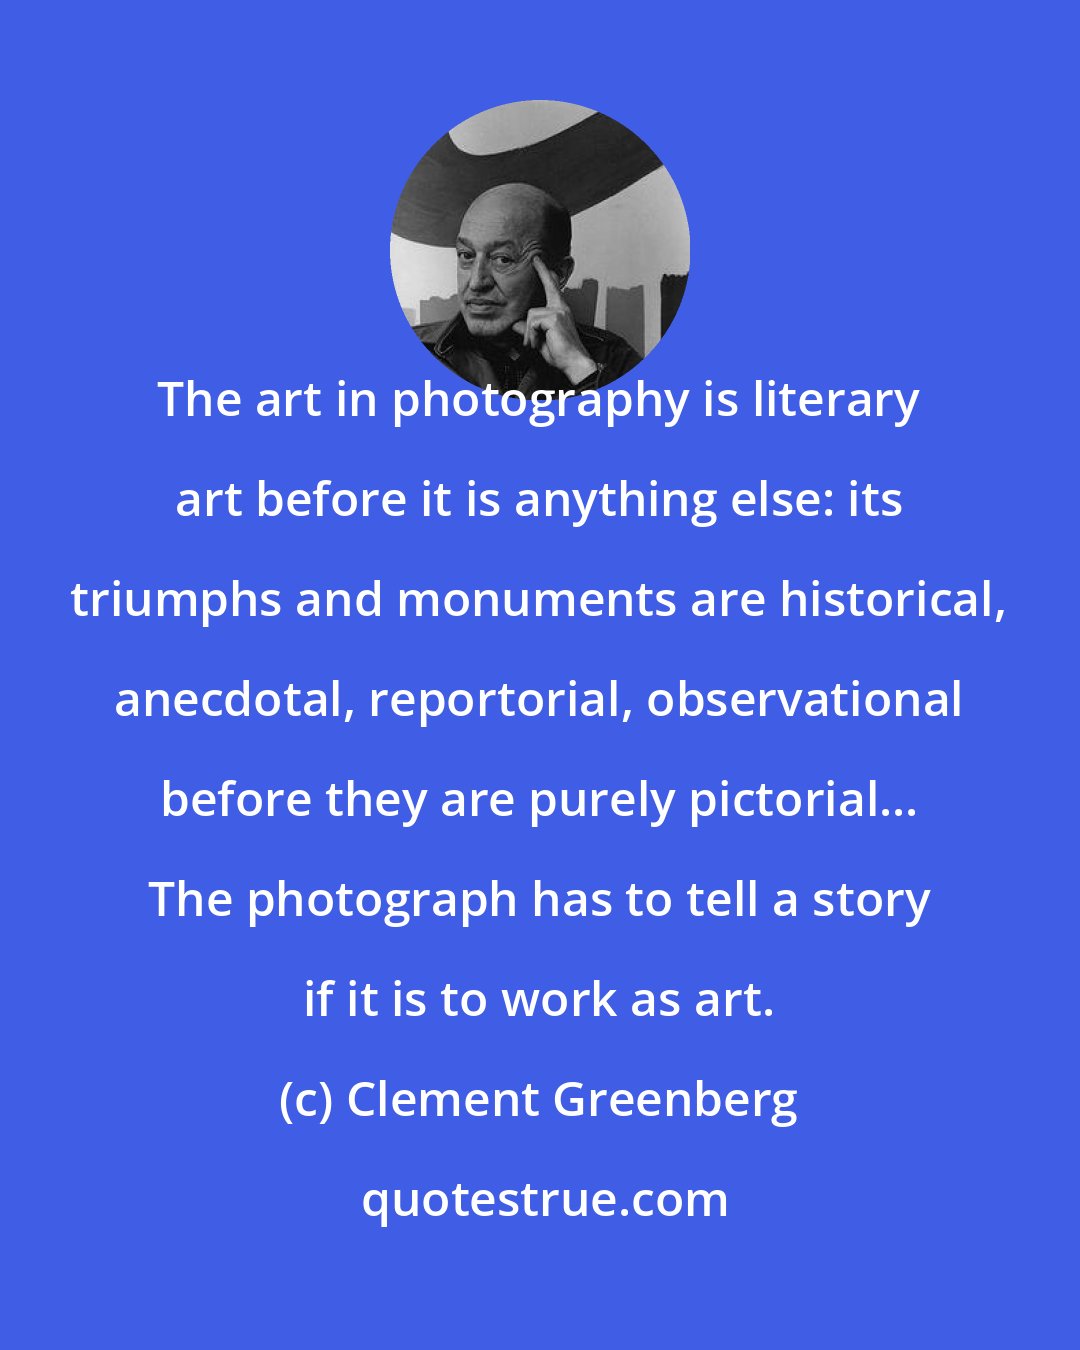 Clement Greenberg: The art in photography is literary art before it is anything else: its triumphs and monuments are historical, anecdotal, reportorial, observational before they are purely pictorial... The photograph has to tell a story if it is to work as art.